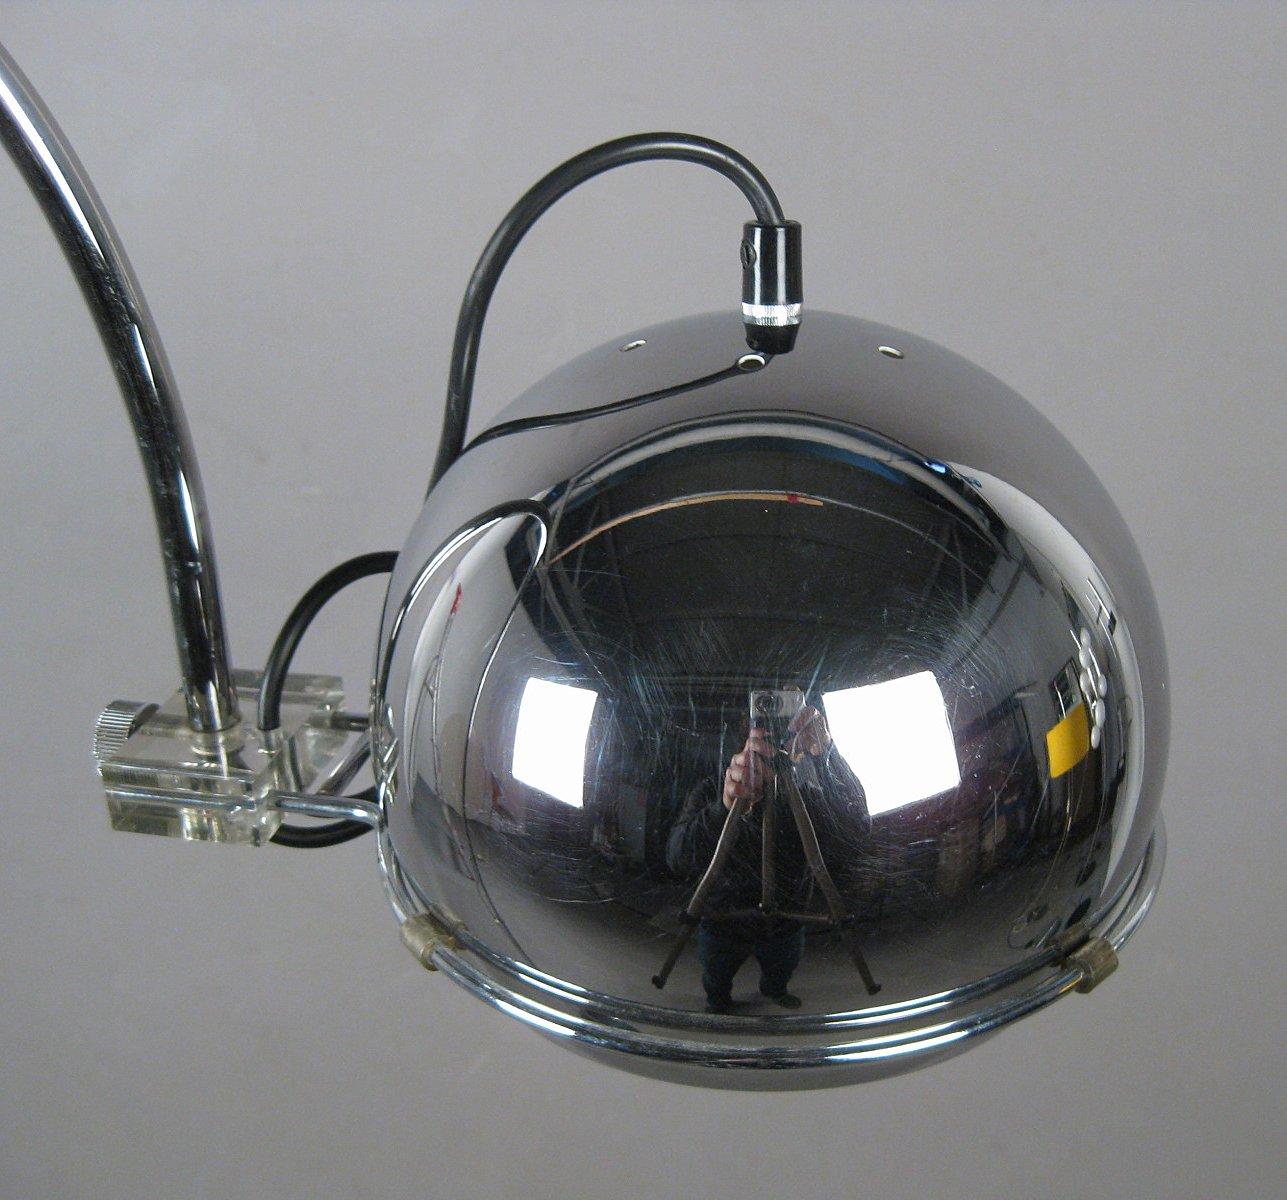 Small chrome ball bow light of the 1970s. Adjustable chromed metal construction, loose recessed spherical reflector that can be turned up or down. Slight signs of wear commensurate with age.